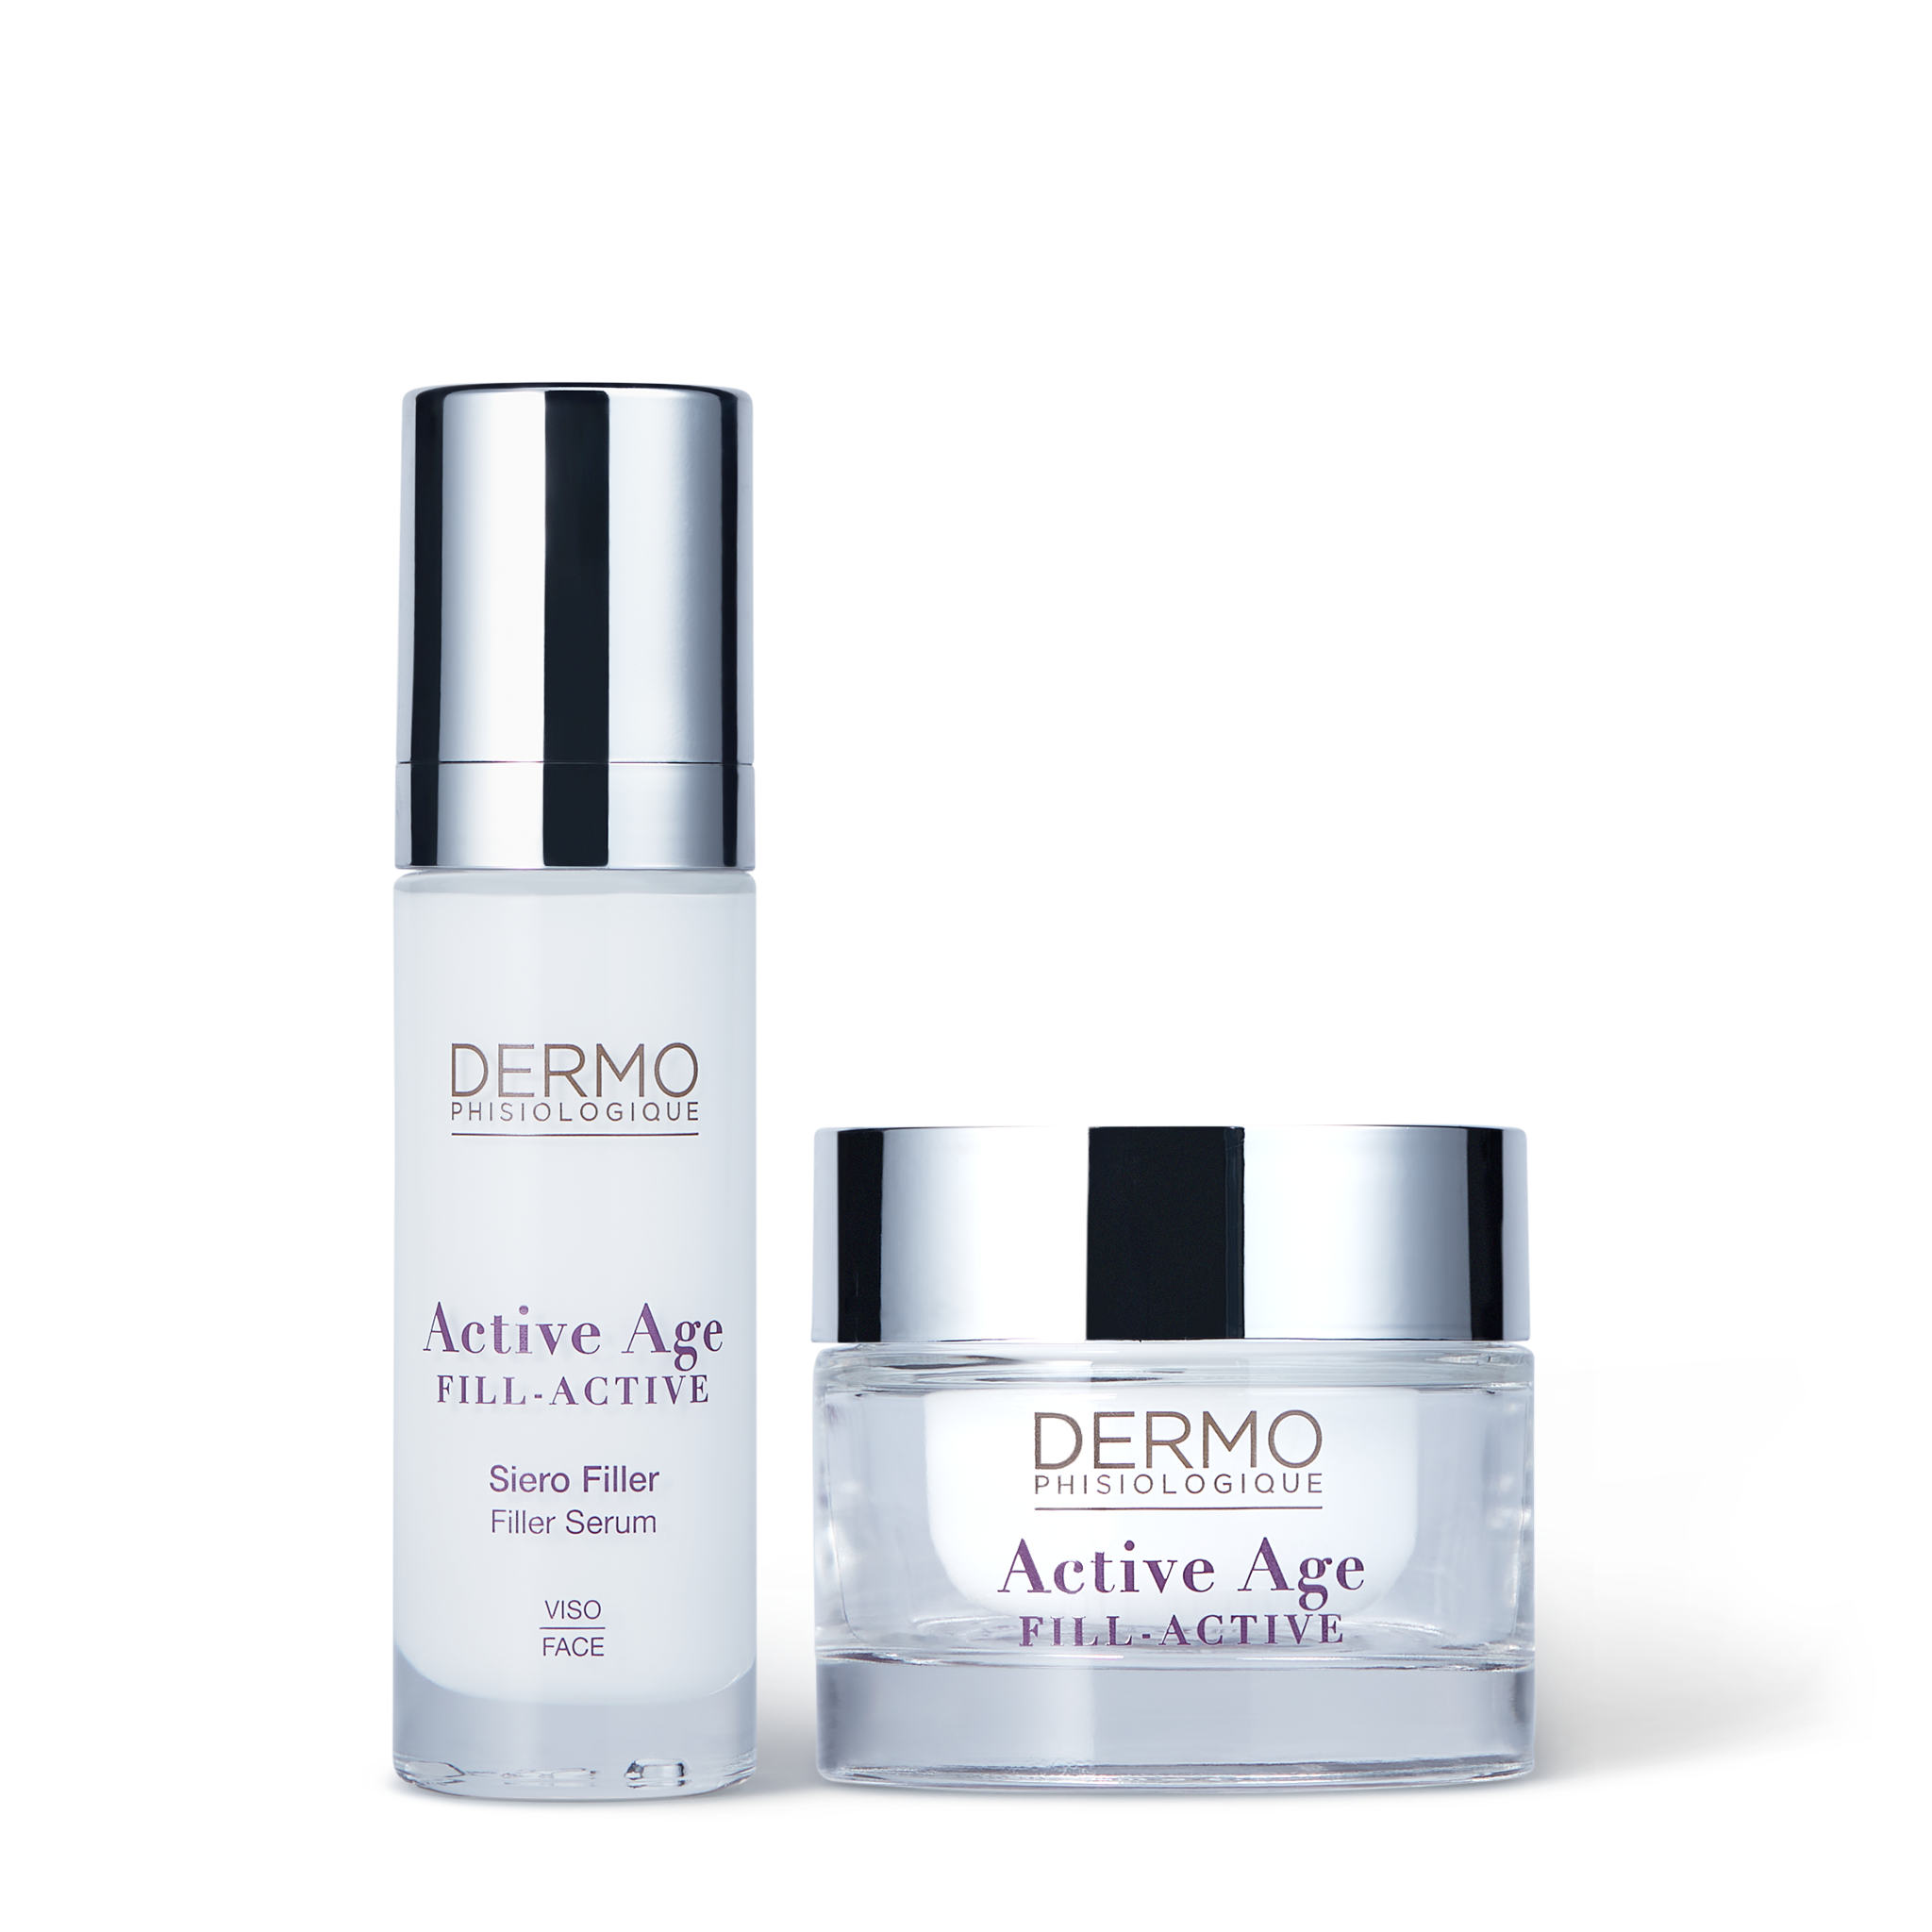 Active Age Fill Anti-aging Cream and Serum